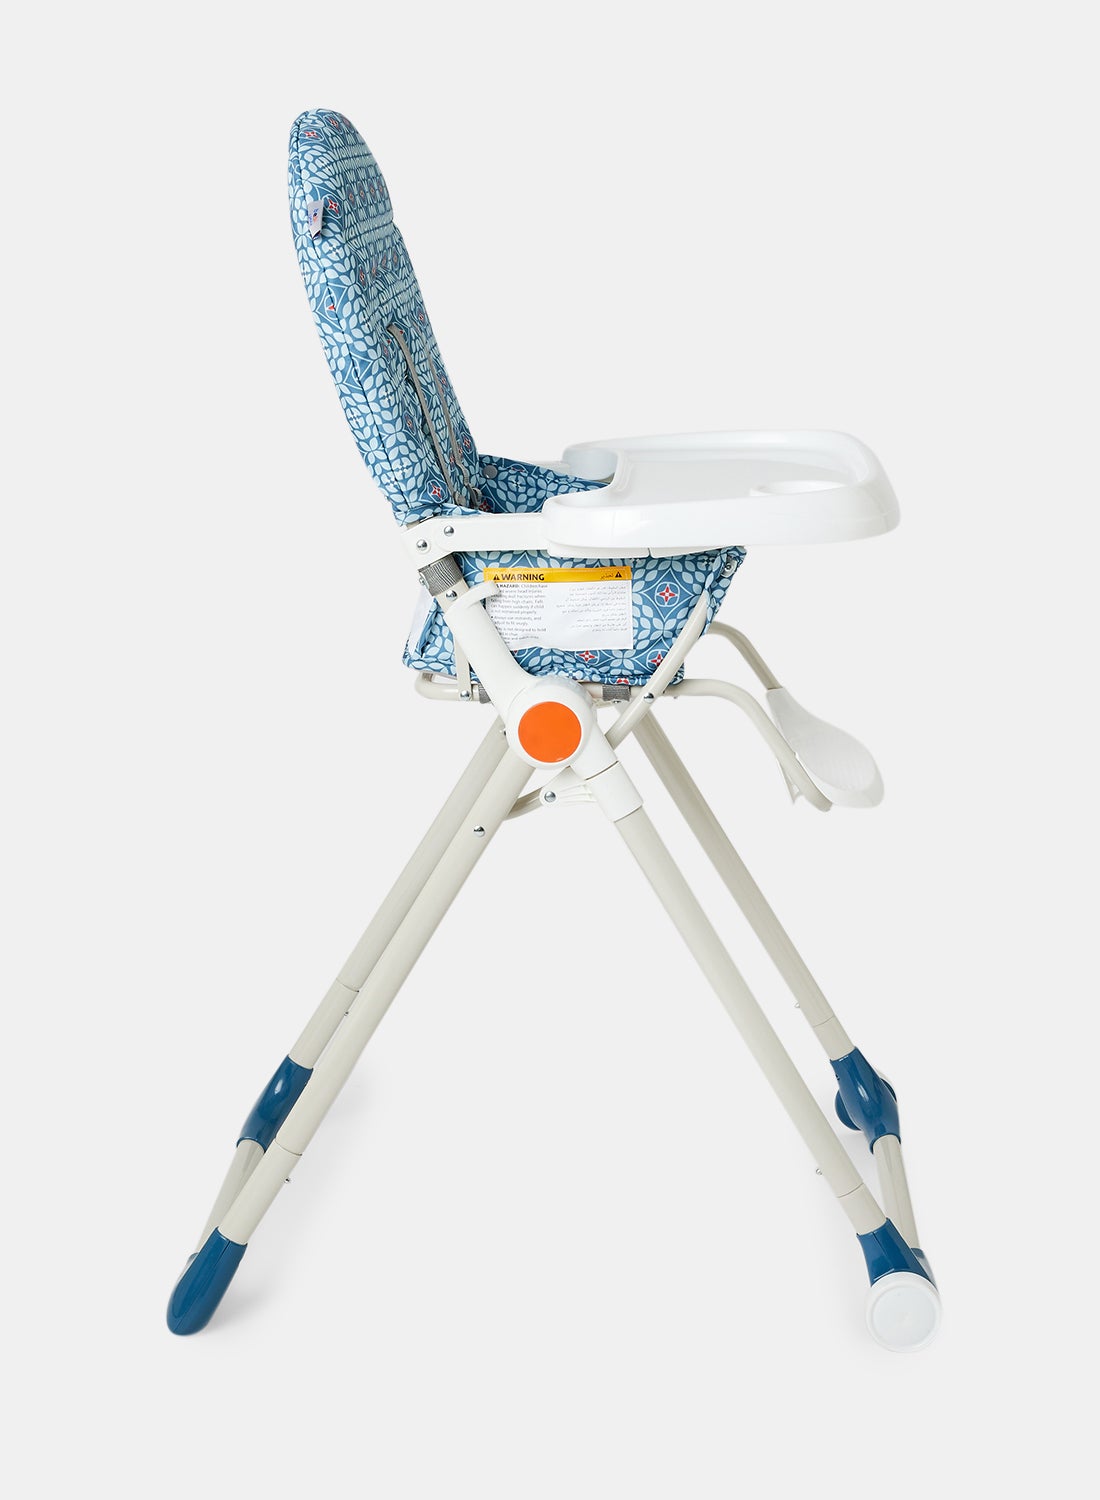 Foldable Baby Feeding High Chair Lightweight And Foldable With Multiple Recline Modes Suitable For Babies For 6 Months To 3 Years Blue 